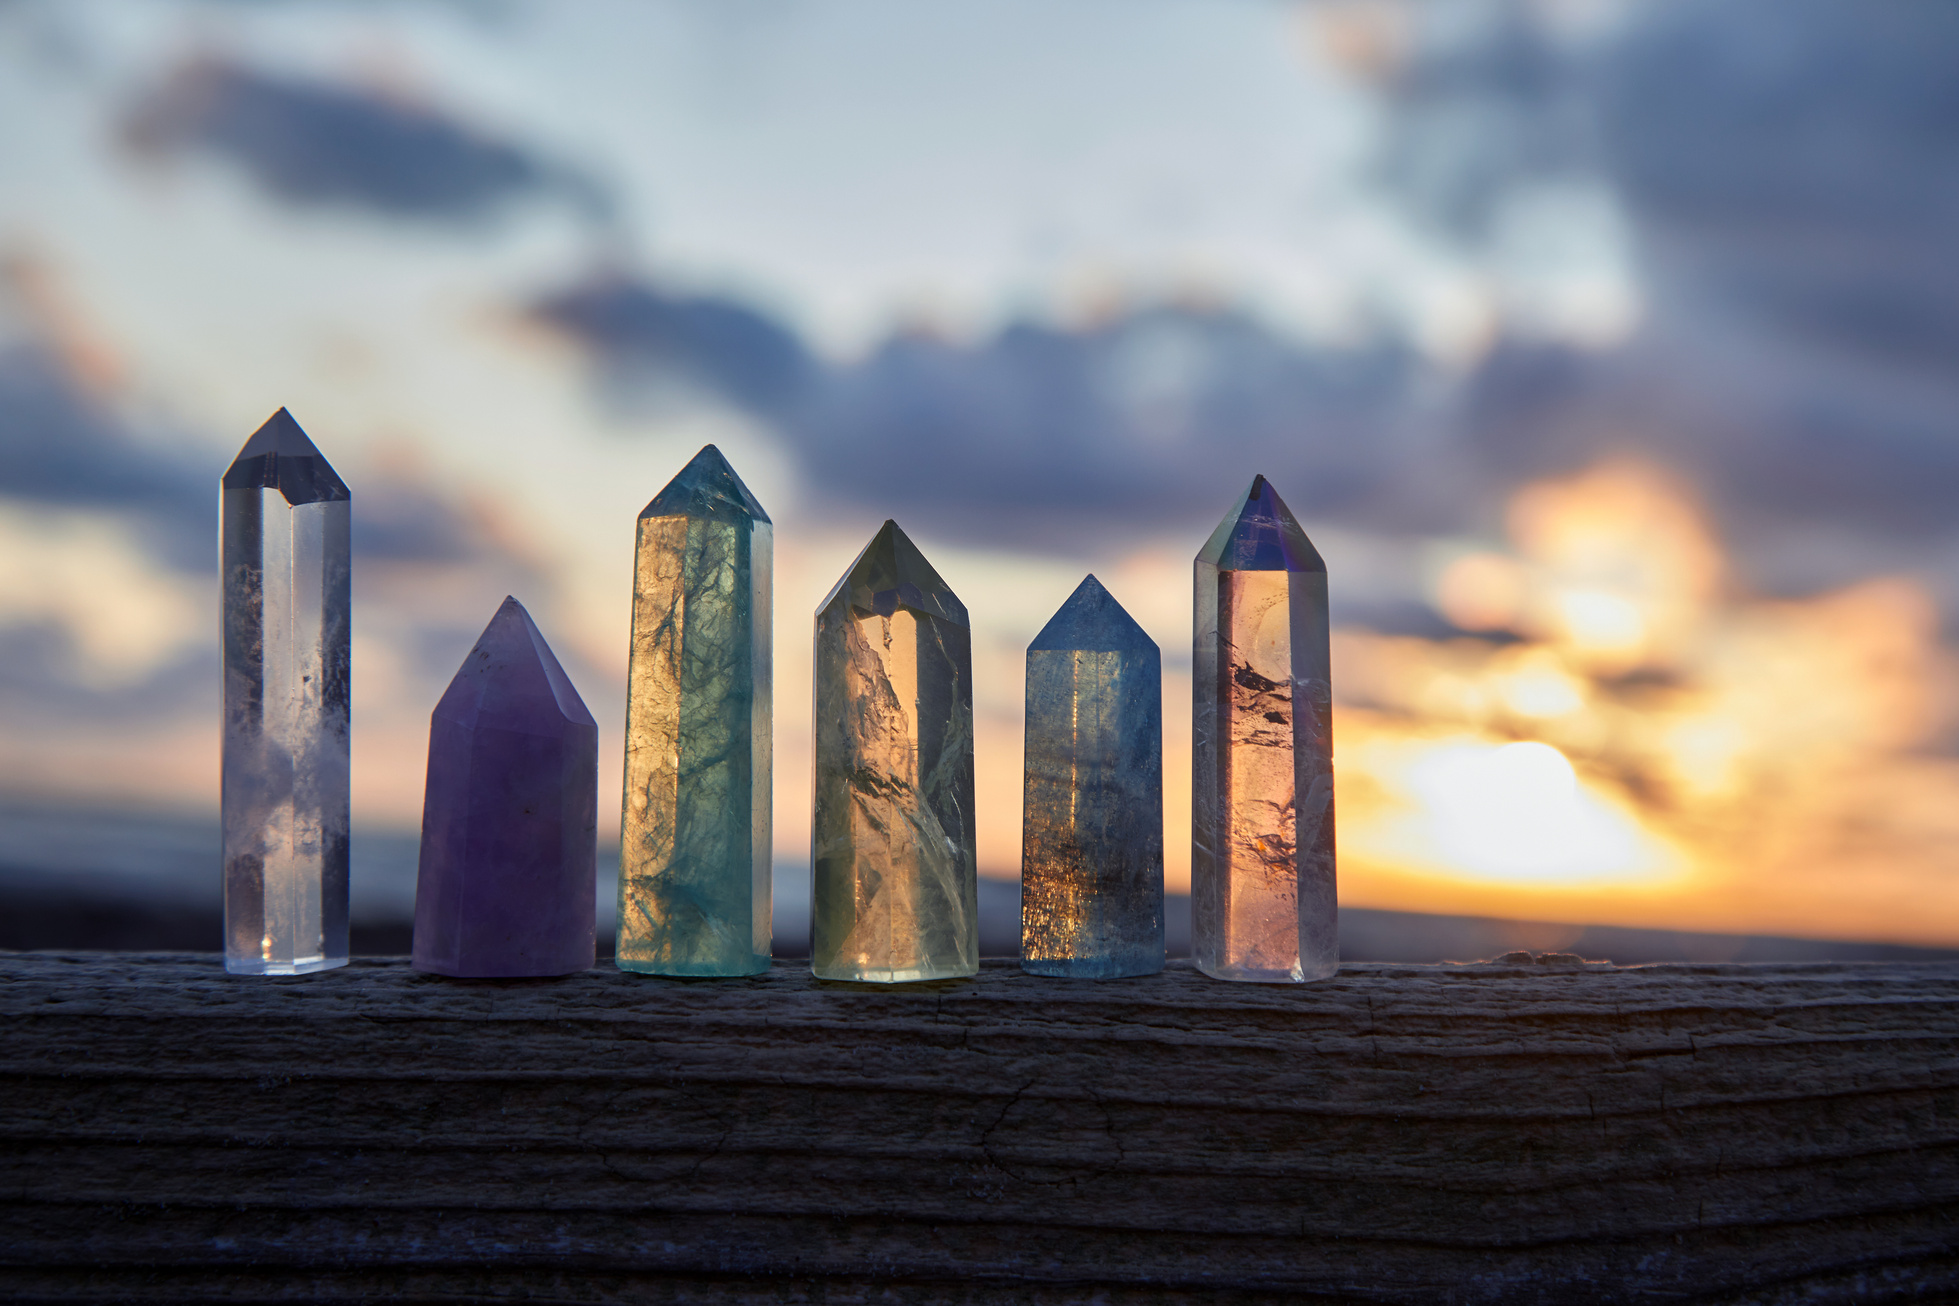 Healing Reiki Crystals on Wood by the Sea at Sunset